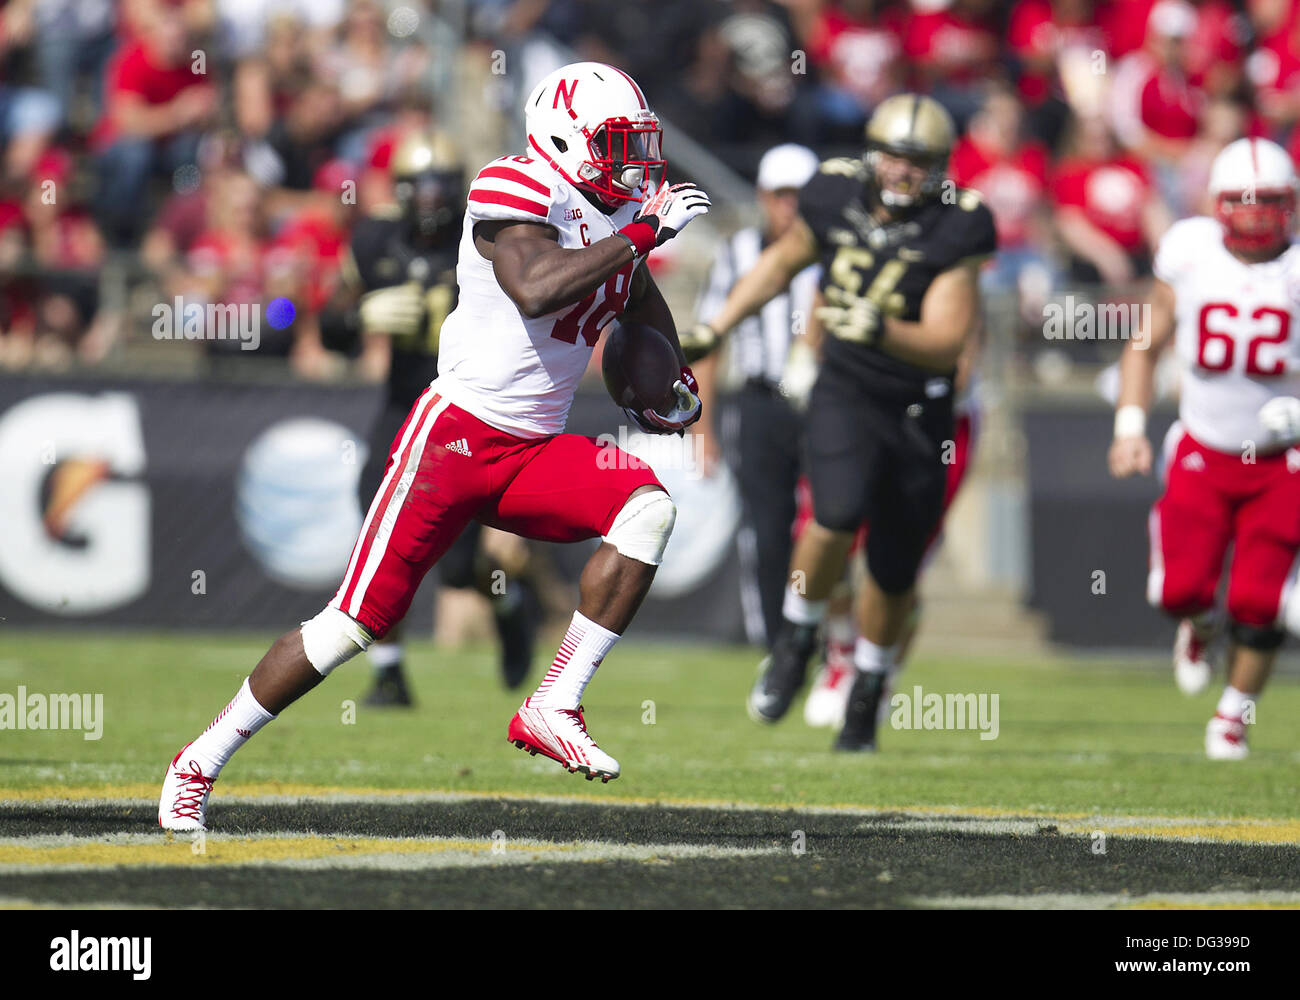 West Lafayette, Indiana, USA. 12th Oct, 2013. October 12, 2013: Nebraska wide receiver Quincy Enunwa (18) runs for yardage during NCAA Football game action between the Nebraska Cornhuskers and the Purdue Boilermakers at Ross-Ade Stadium in West Lafayette, Indiana. Nebraska defeated Purdue 44-7. © csm/Alamy Live News Stock Photo